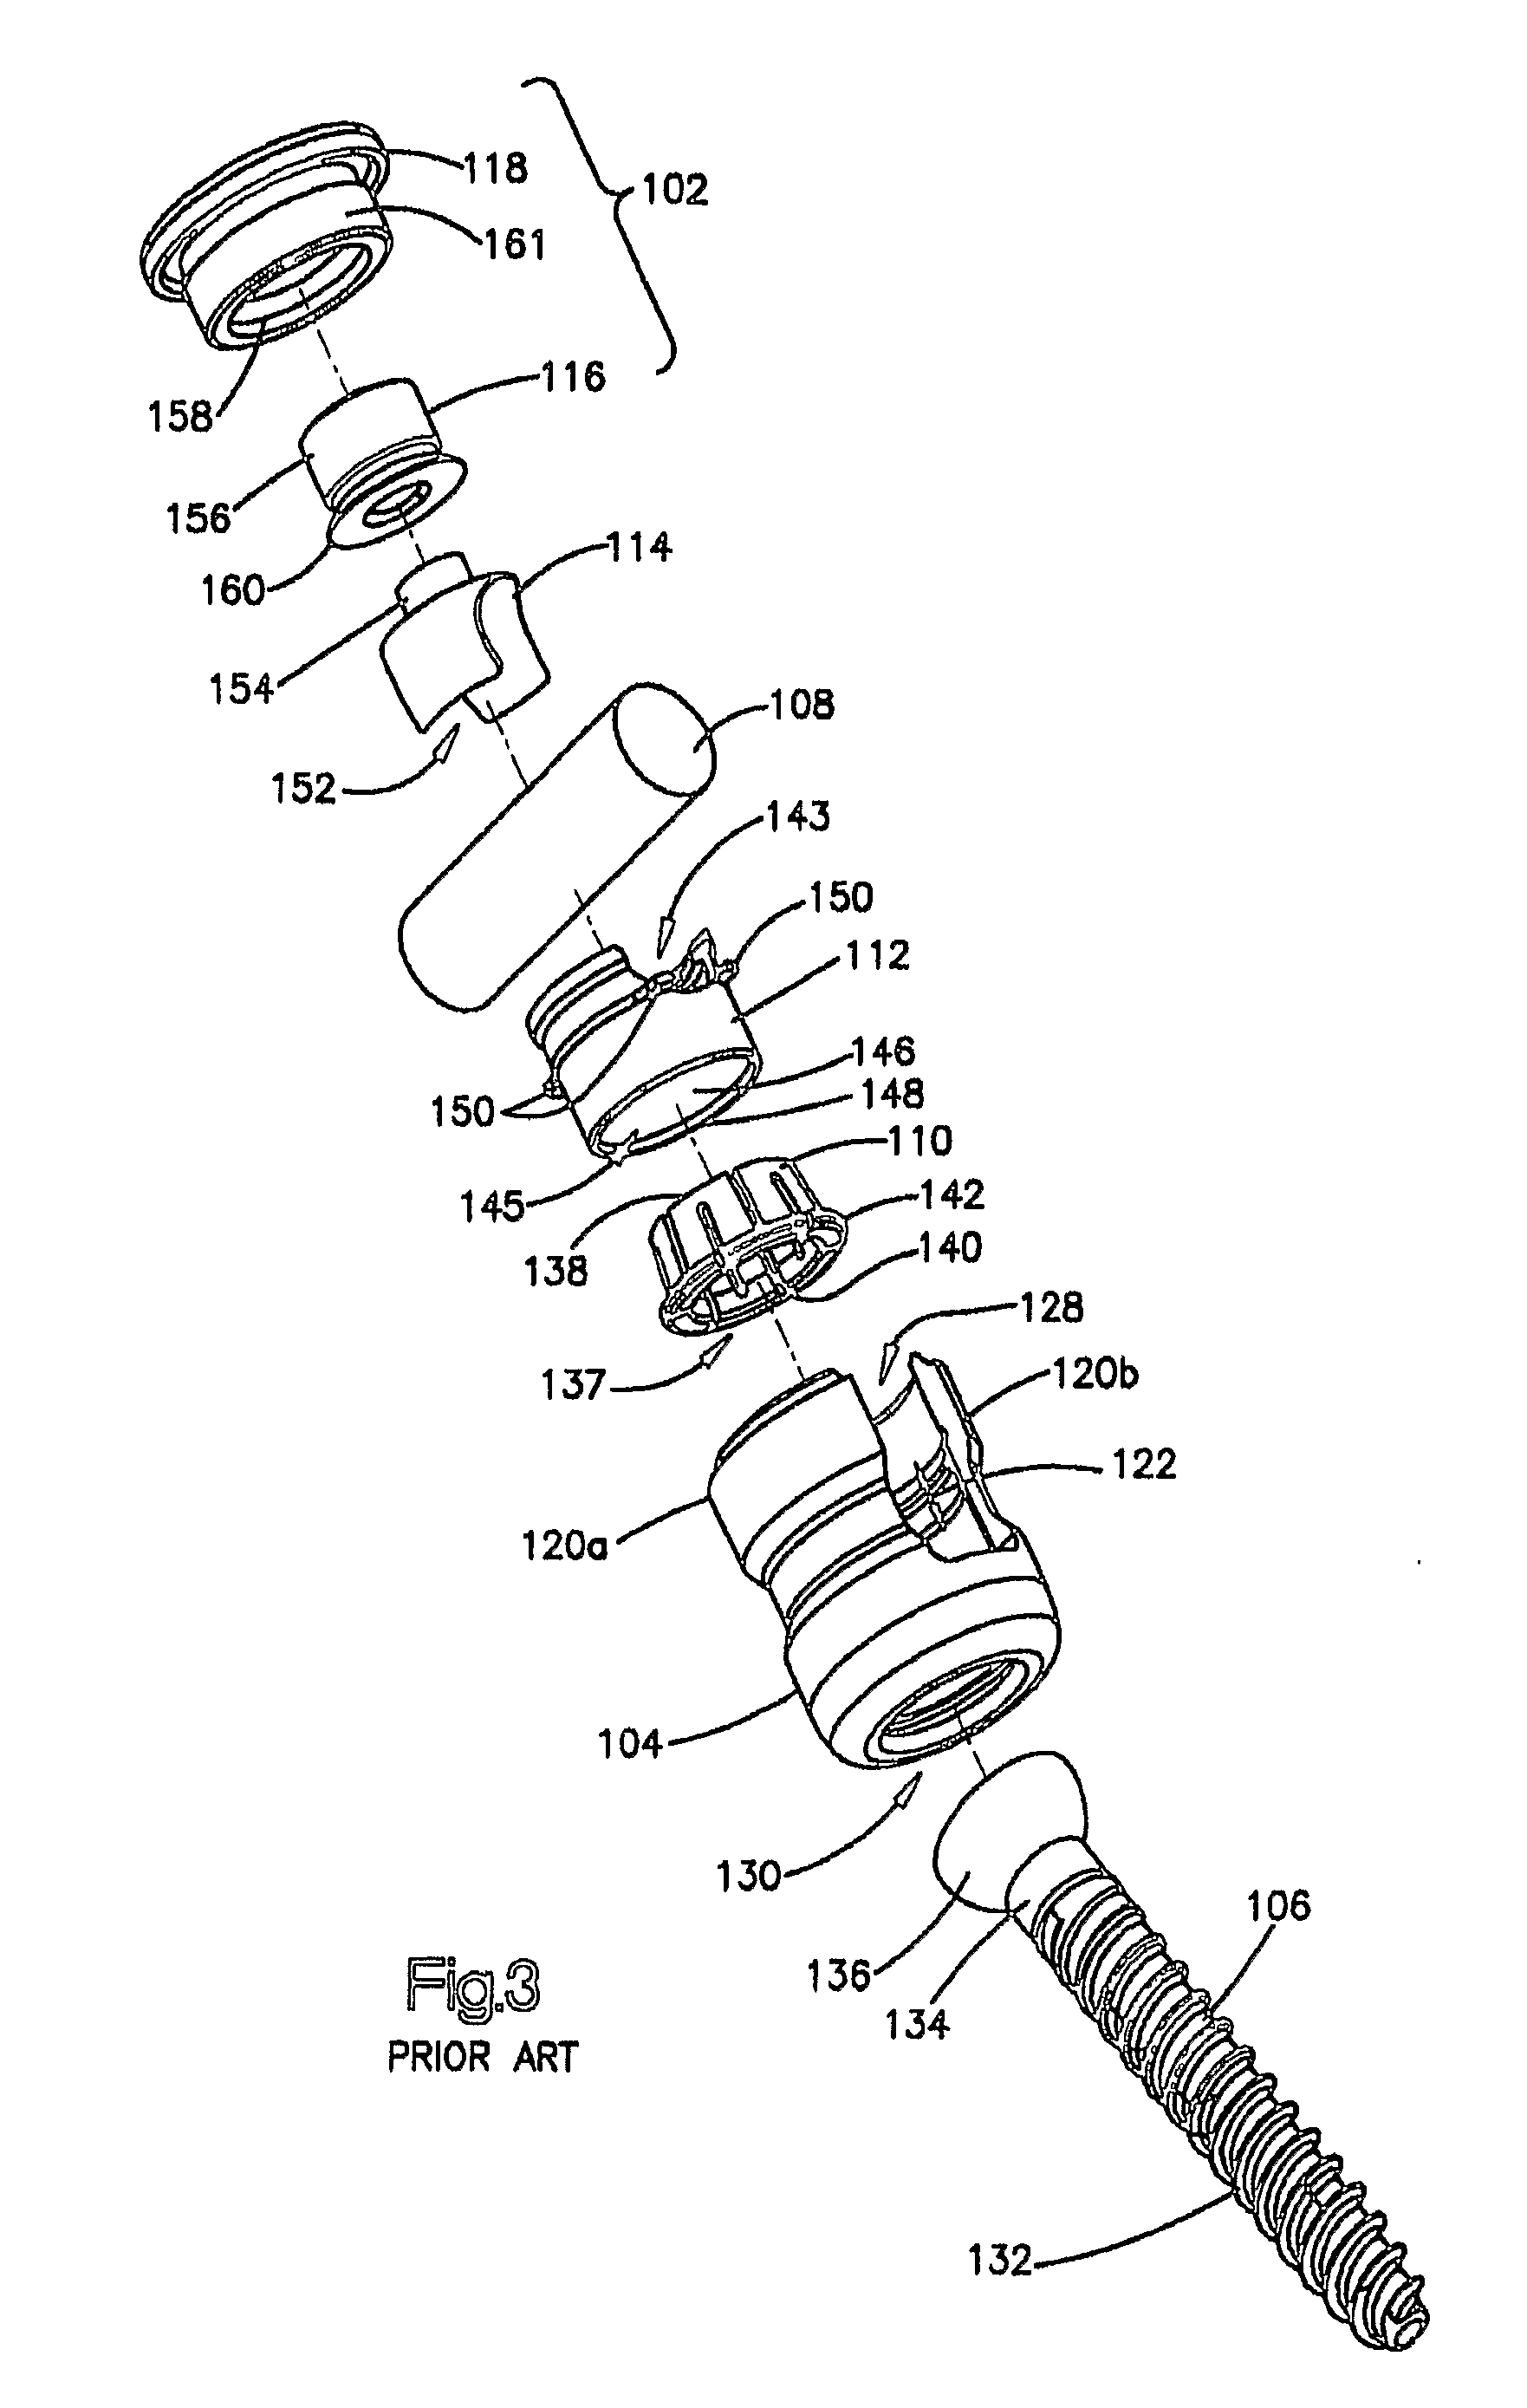 Polyaxial bone anchor with headless pedicle screw